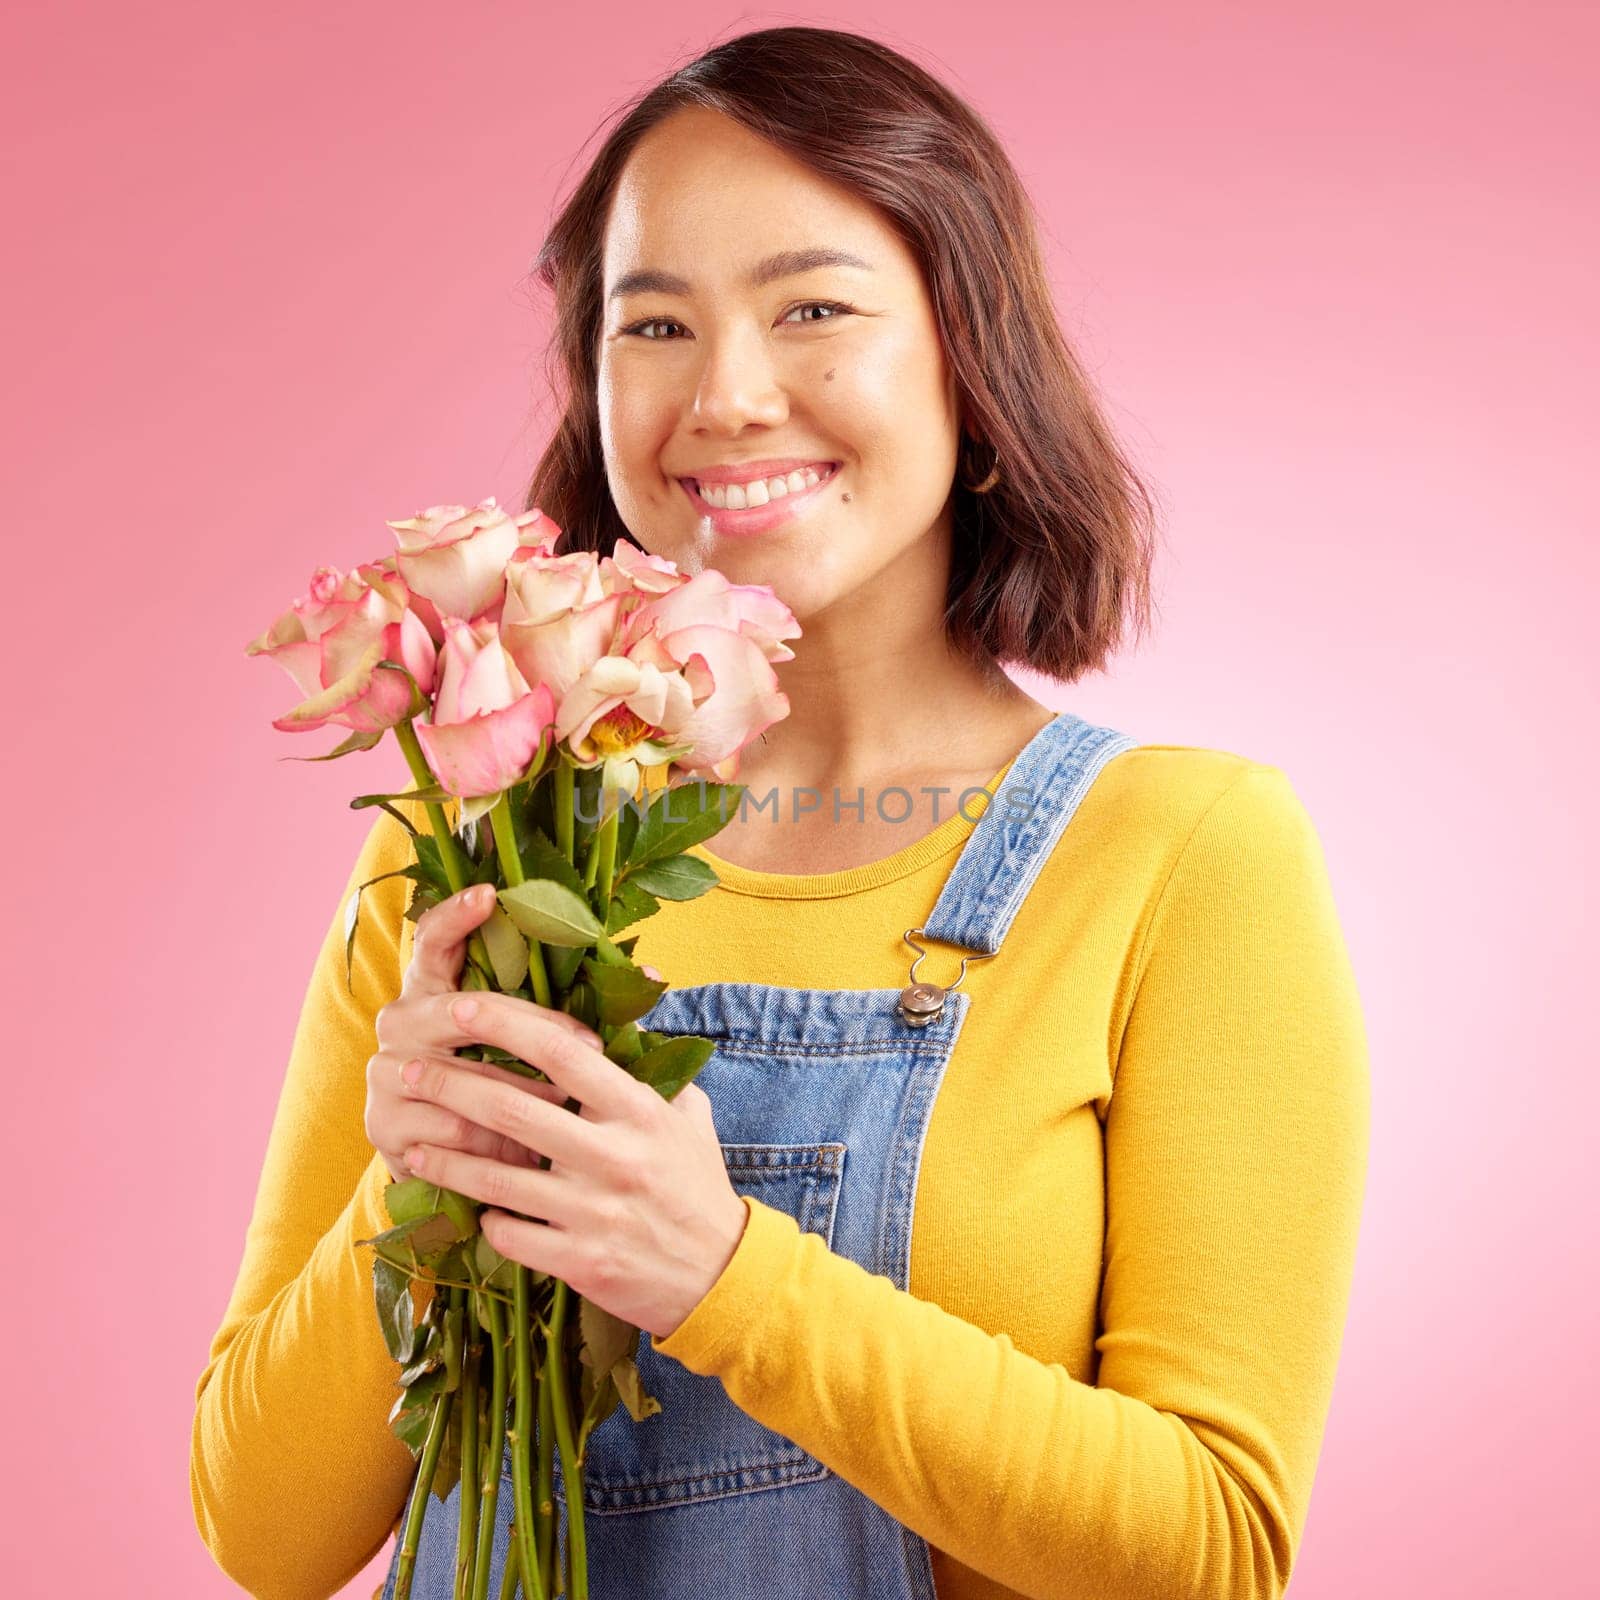 Woman, roses and gift with smile in studio portrait for celebration, birthday or party by pink background. Japanese student girl, gen z fashion and bouquet of flowers for present, reward or romance.